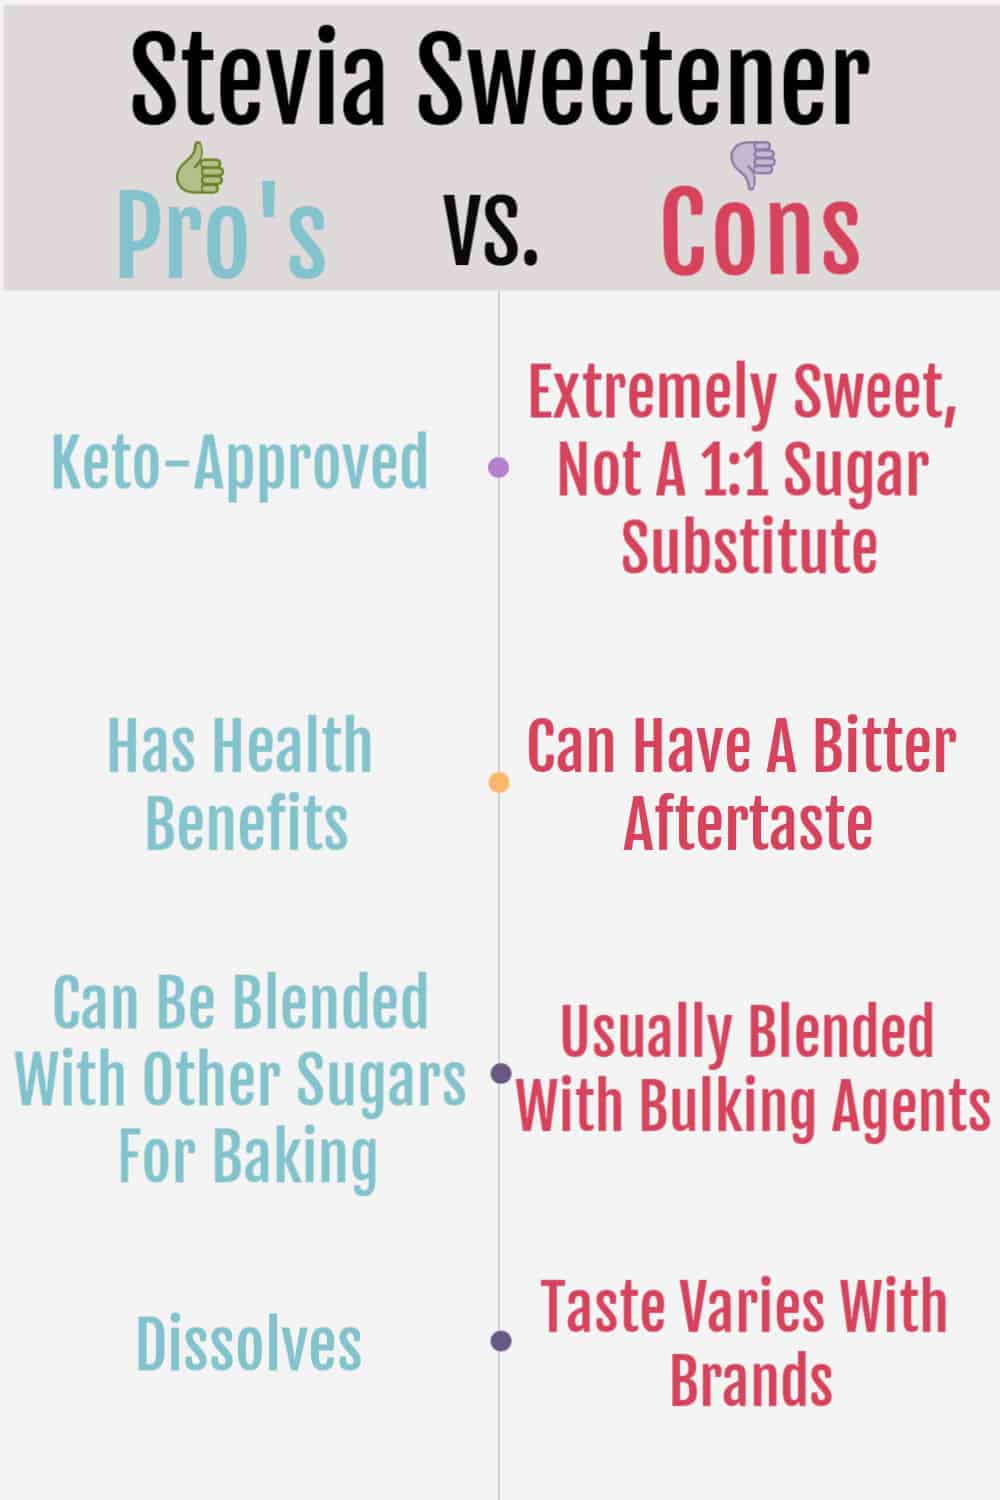 pros and cons chart of stevia